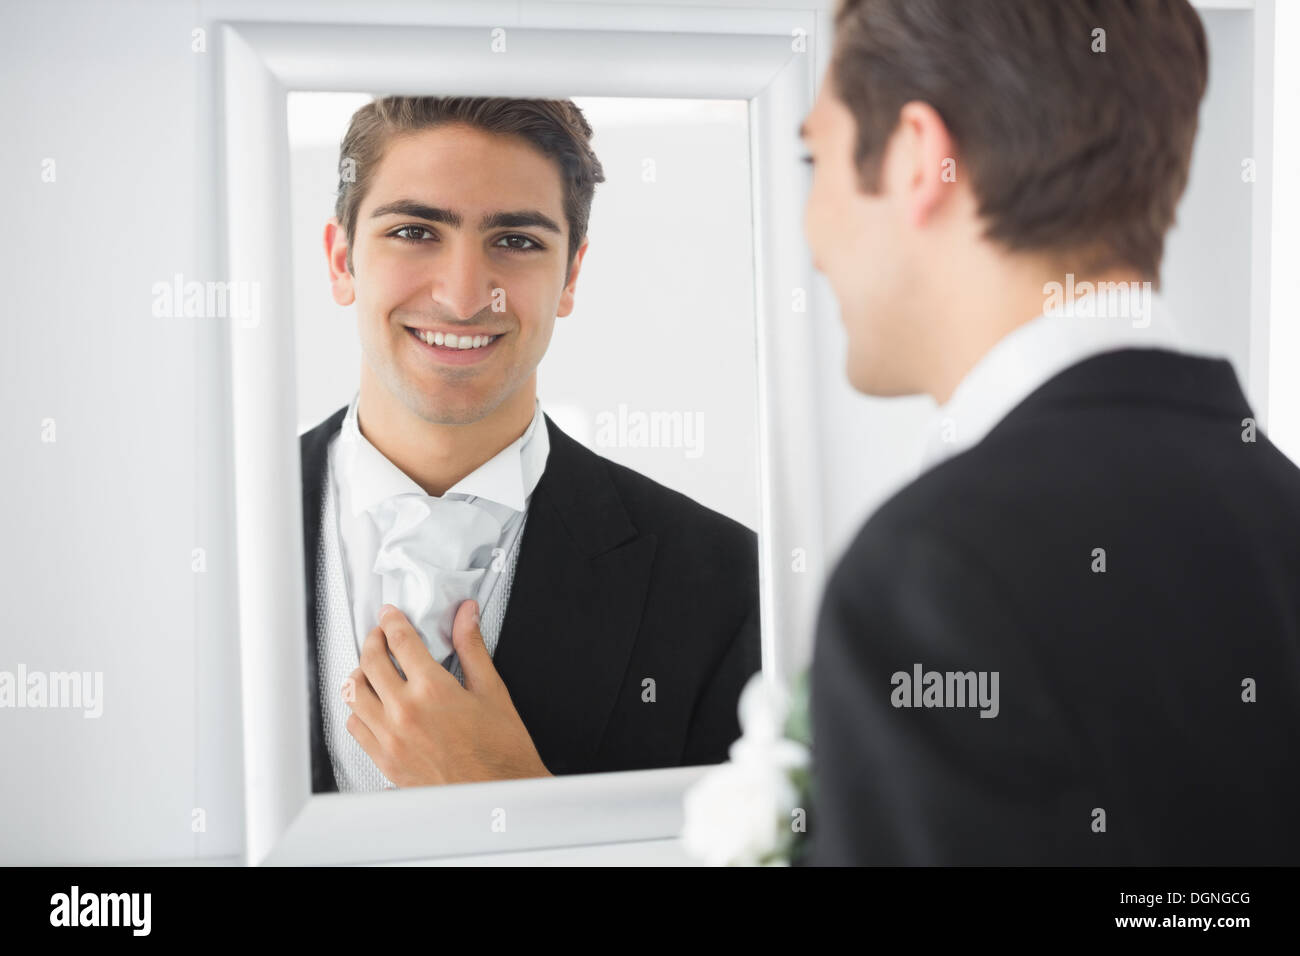 Cheerful young bridegroom standing in front of a mirror Stock Photo